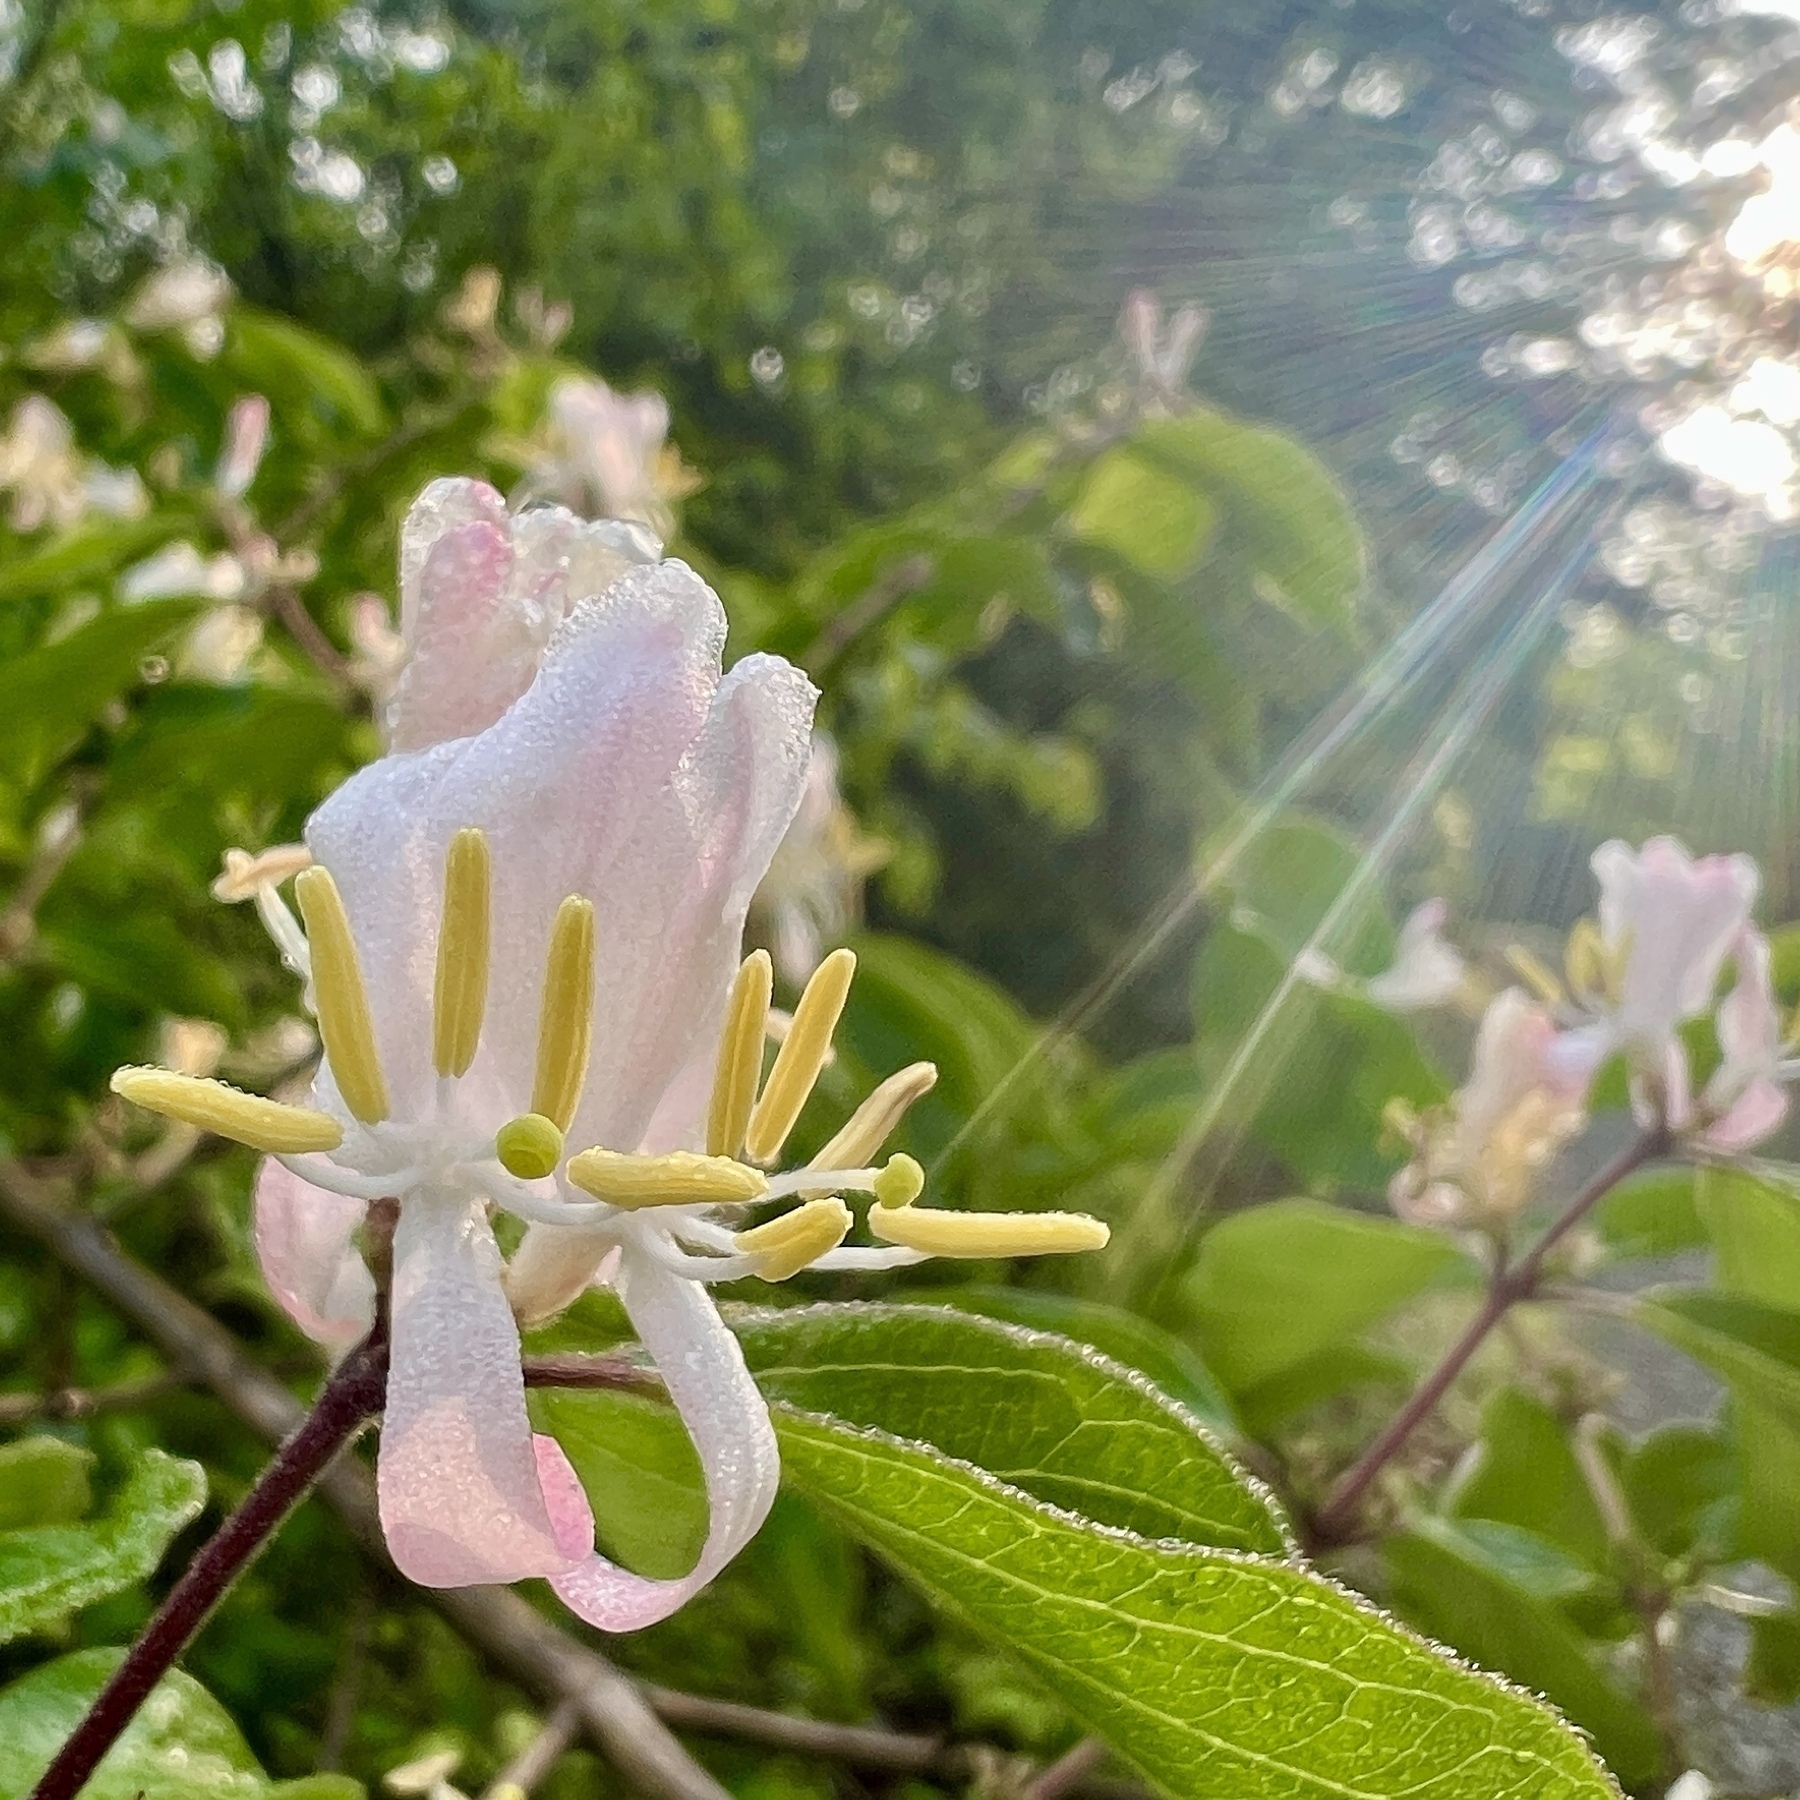 A pale pink flower with yellow anthers is lit by morning sun rays.